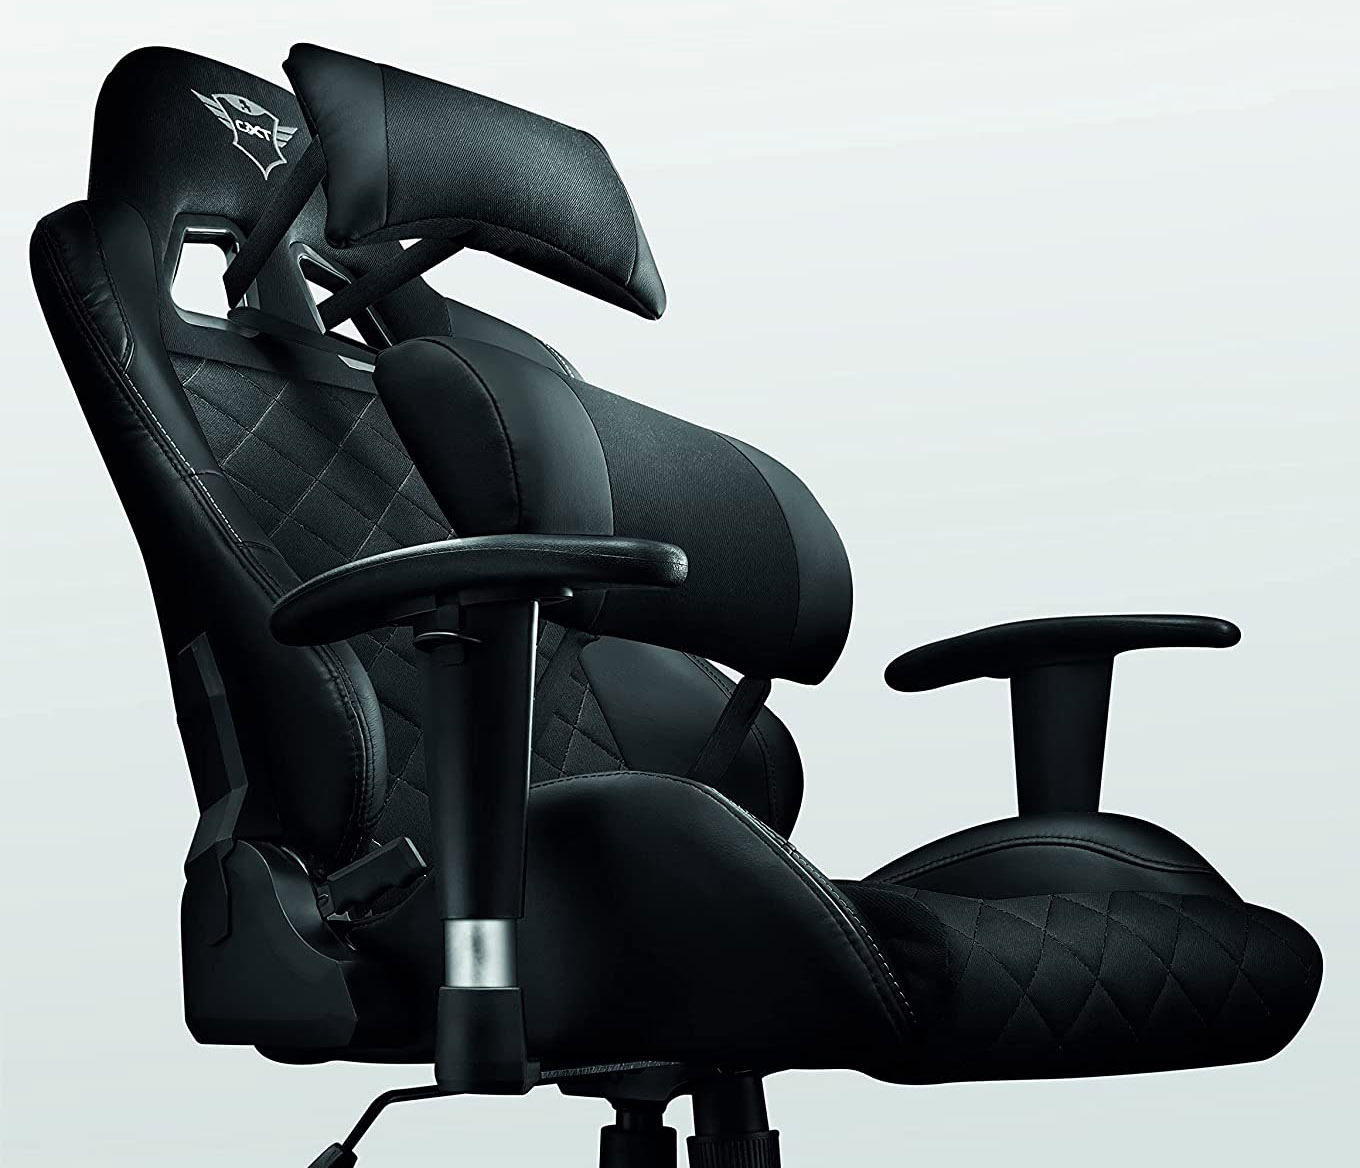 chaise Trust Gaming GXT 707